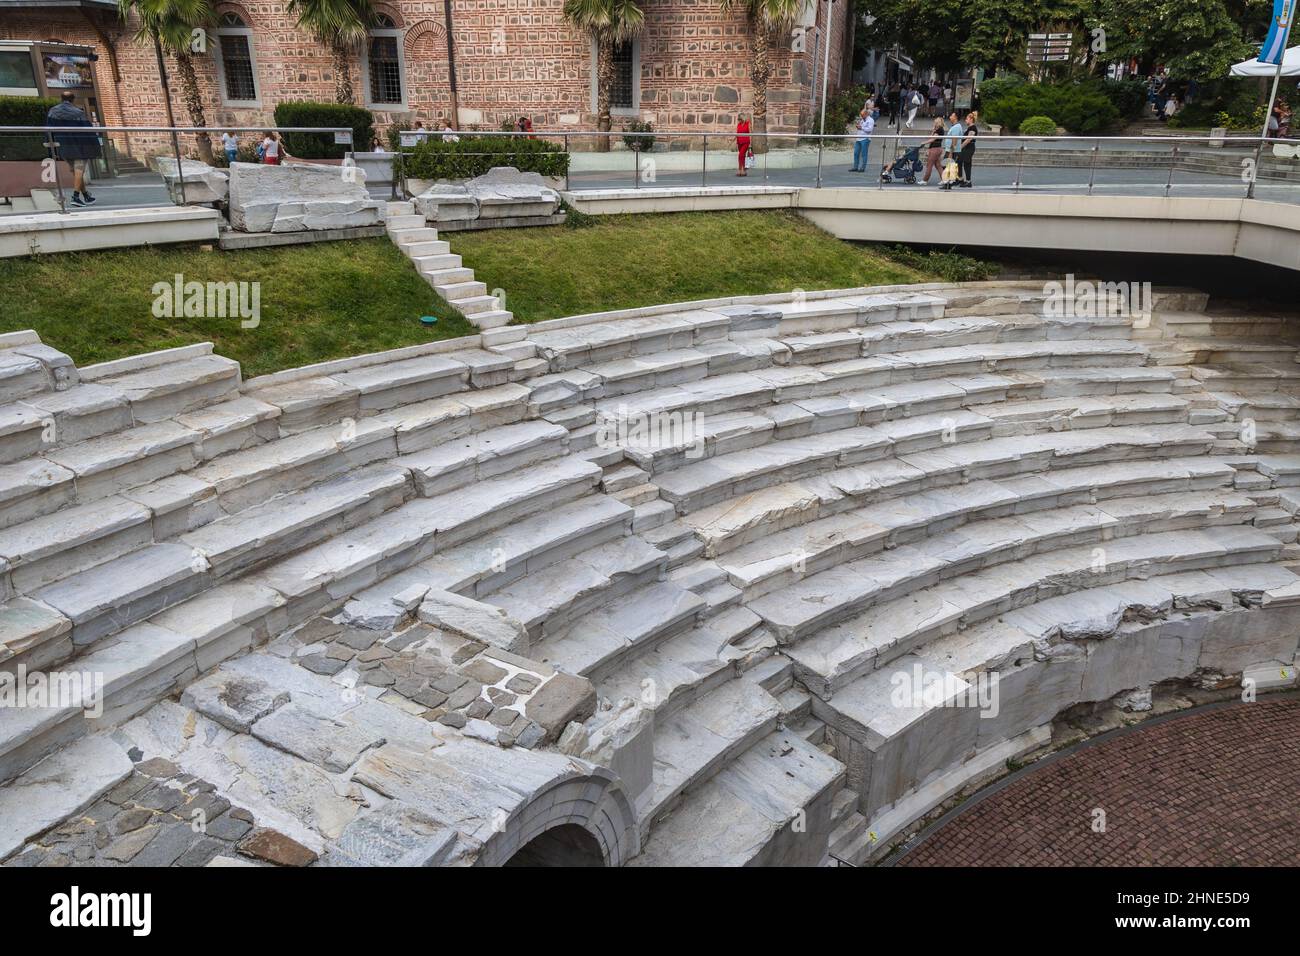 Ancient Stadium of Philipopolis Plovdiv city, capital of Plovdiv Province in south-central Bulgaria Stock Photo